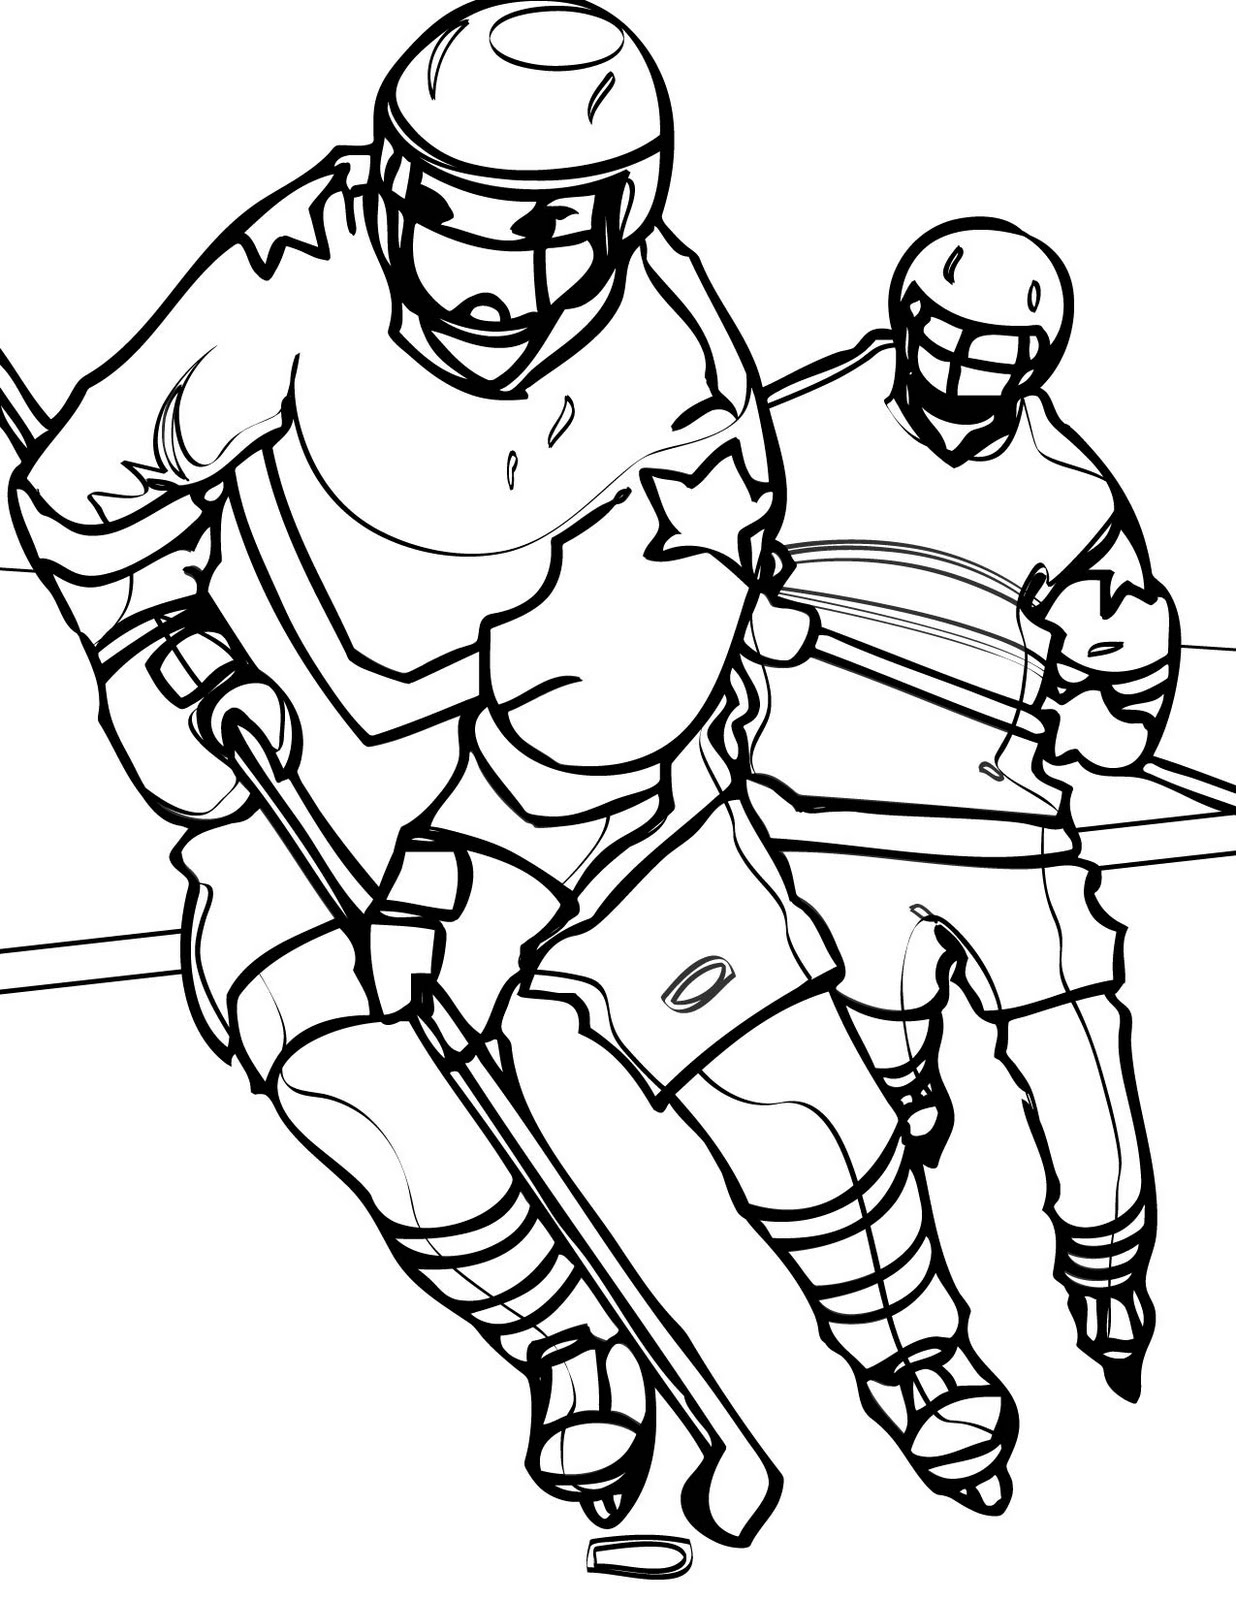 Playing Hockey Coloring Page